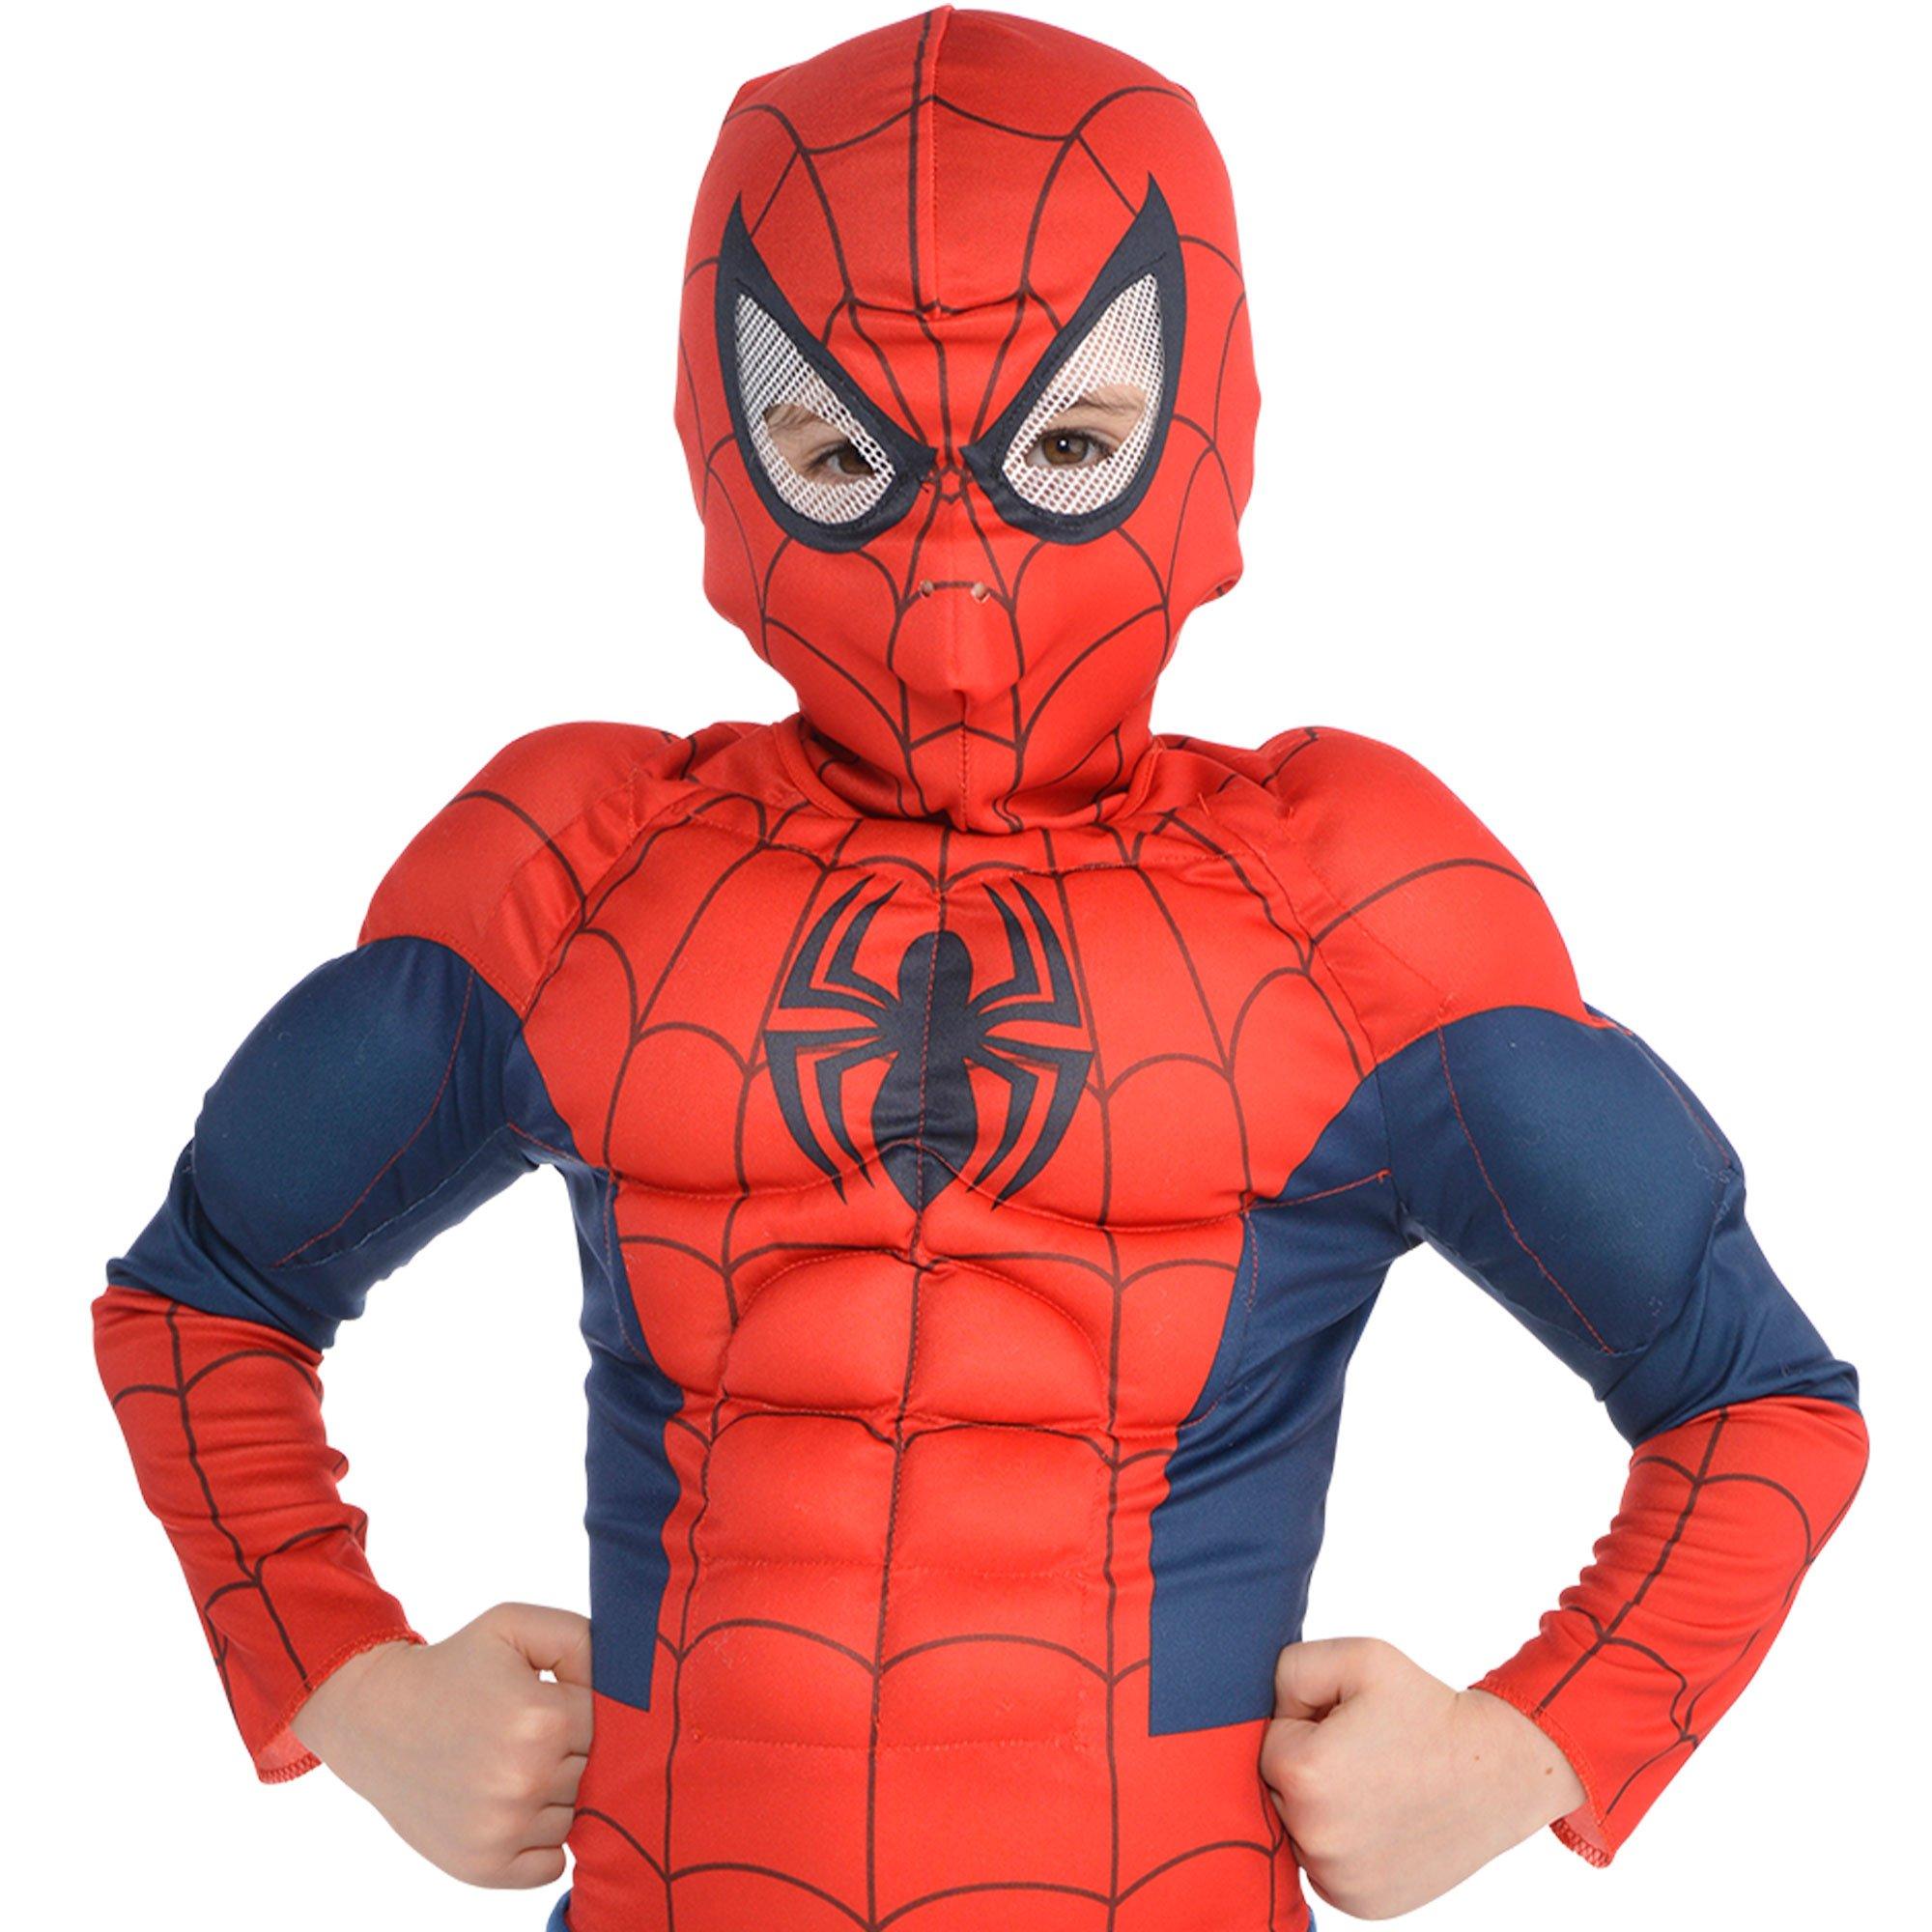 Child Officially Licensed Boys Marvel Classic Spiderman Halloween Costume  Medium, Red and Blue